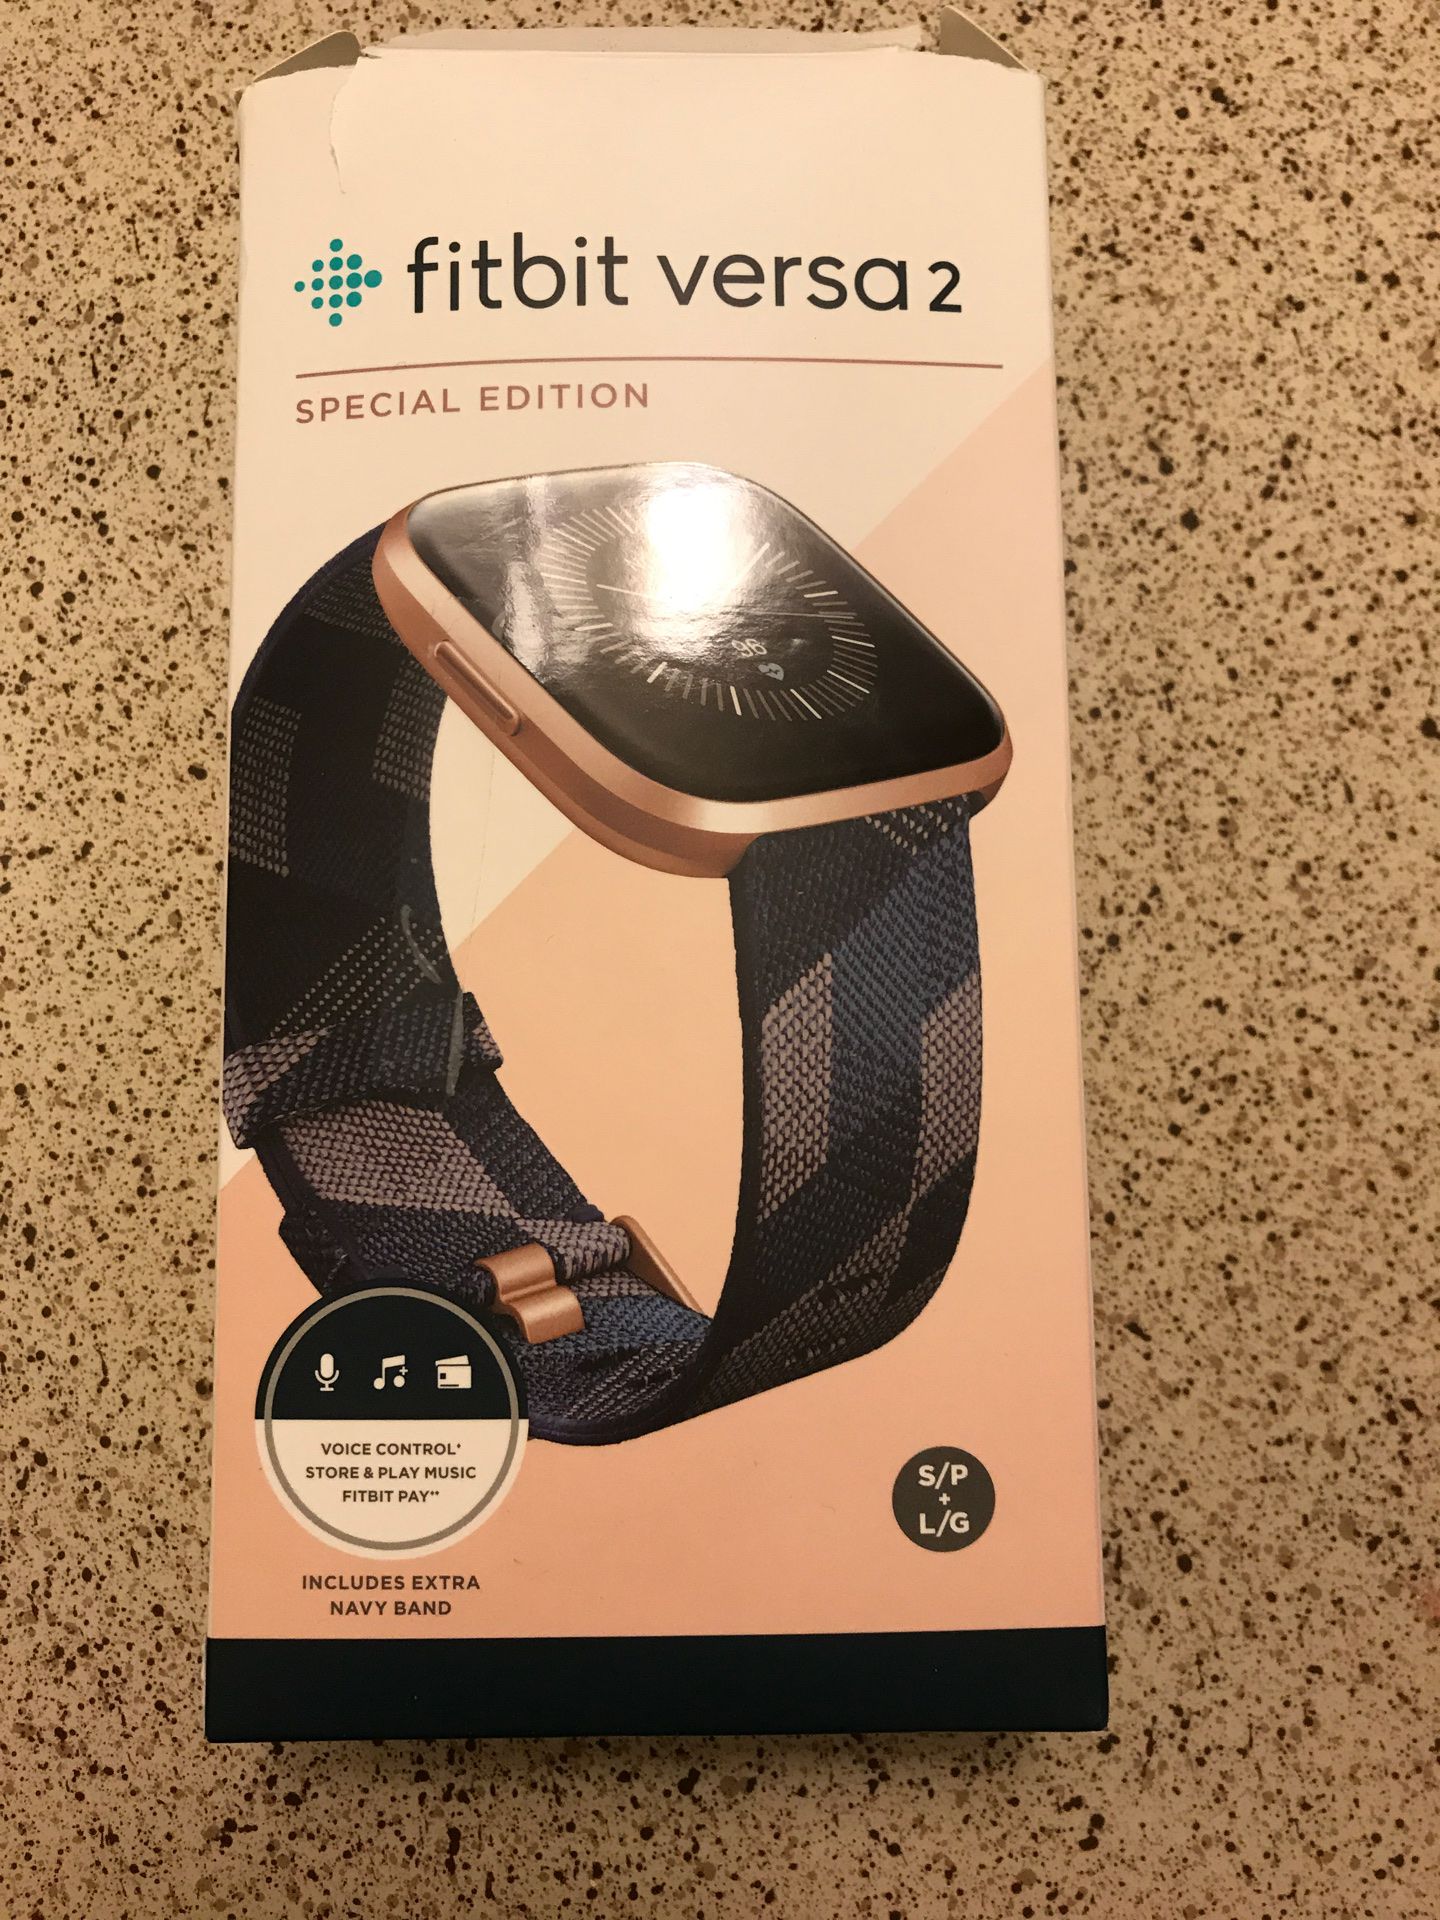 Fitbit versa 2 “special edition” (fitness watch)